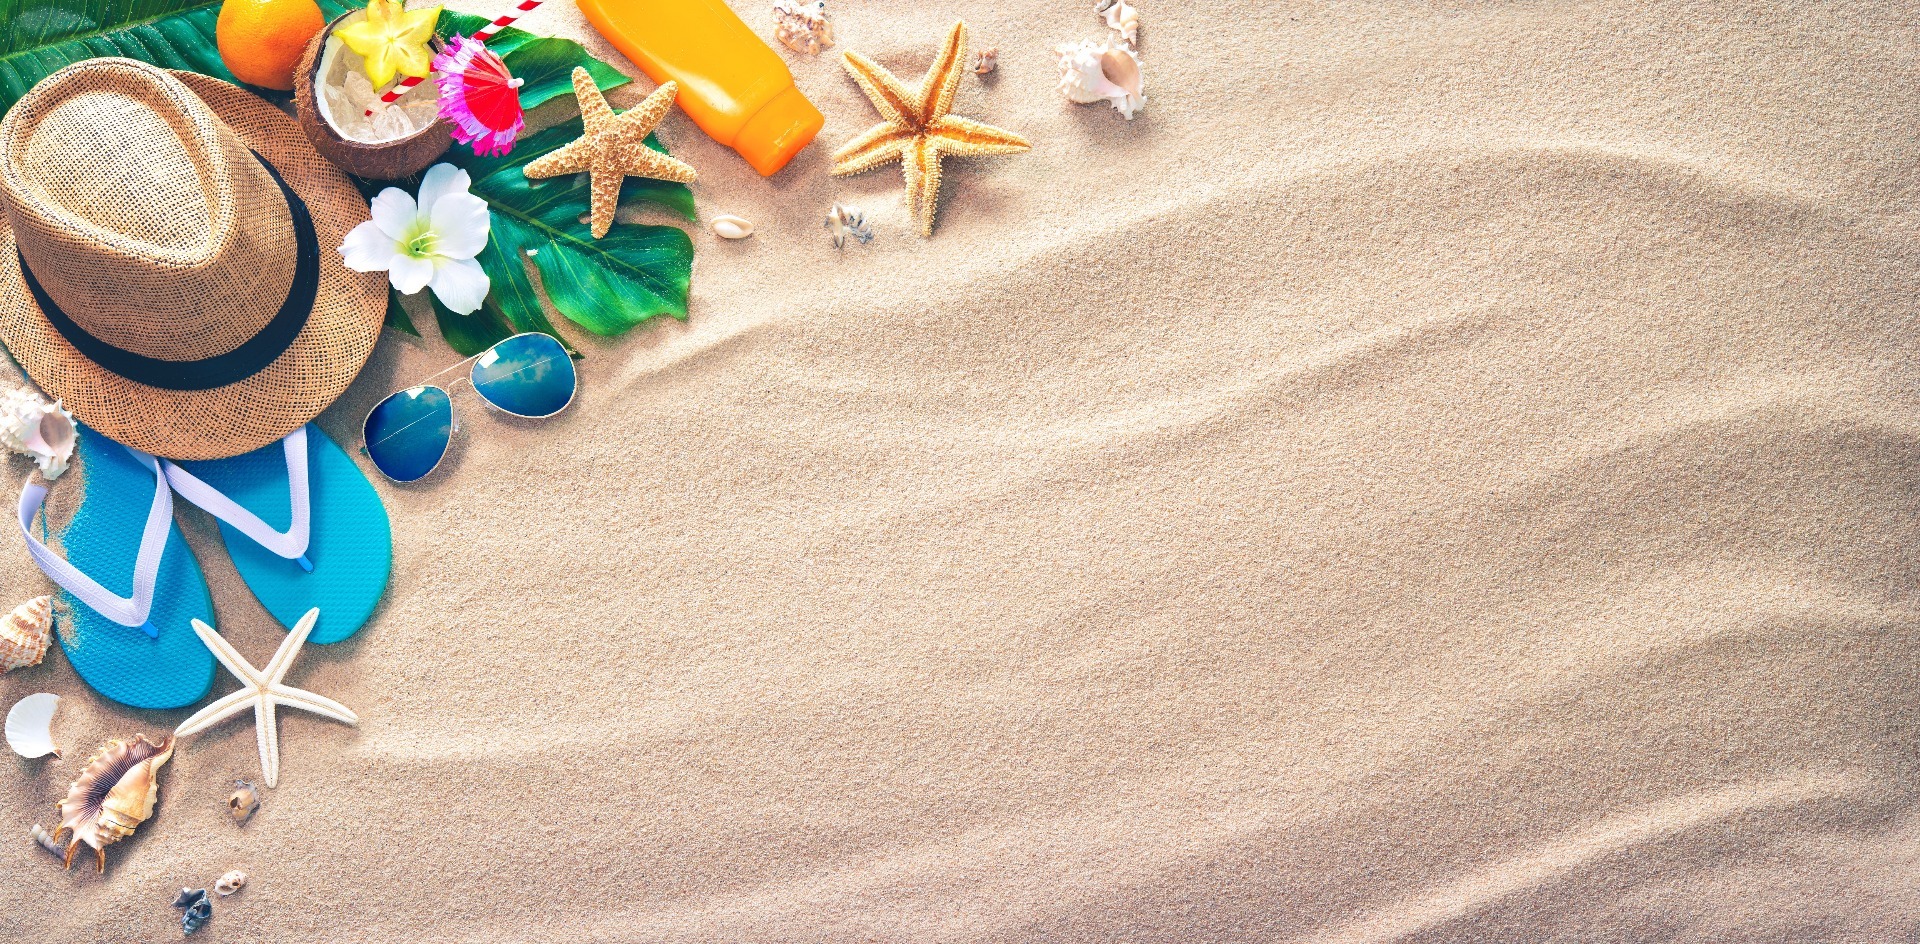 A beach of sand, with beach items placed in the top left hand corner, including a sun hat, a pair of blue flip flops, a bottle of suncream, a pair of sunglasses, a coconut and some leaves, flowers and shells.